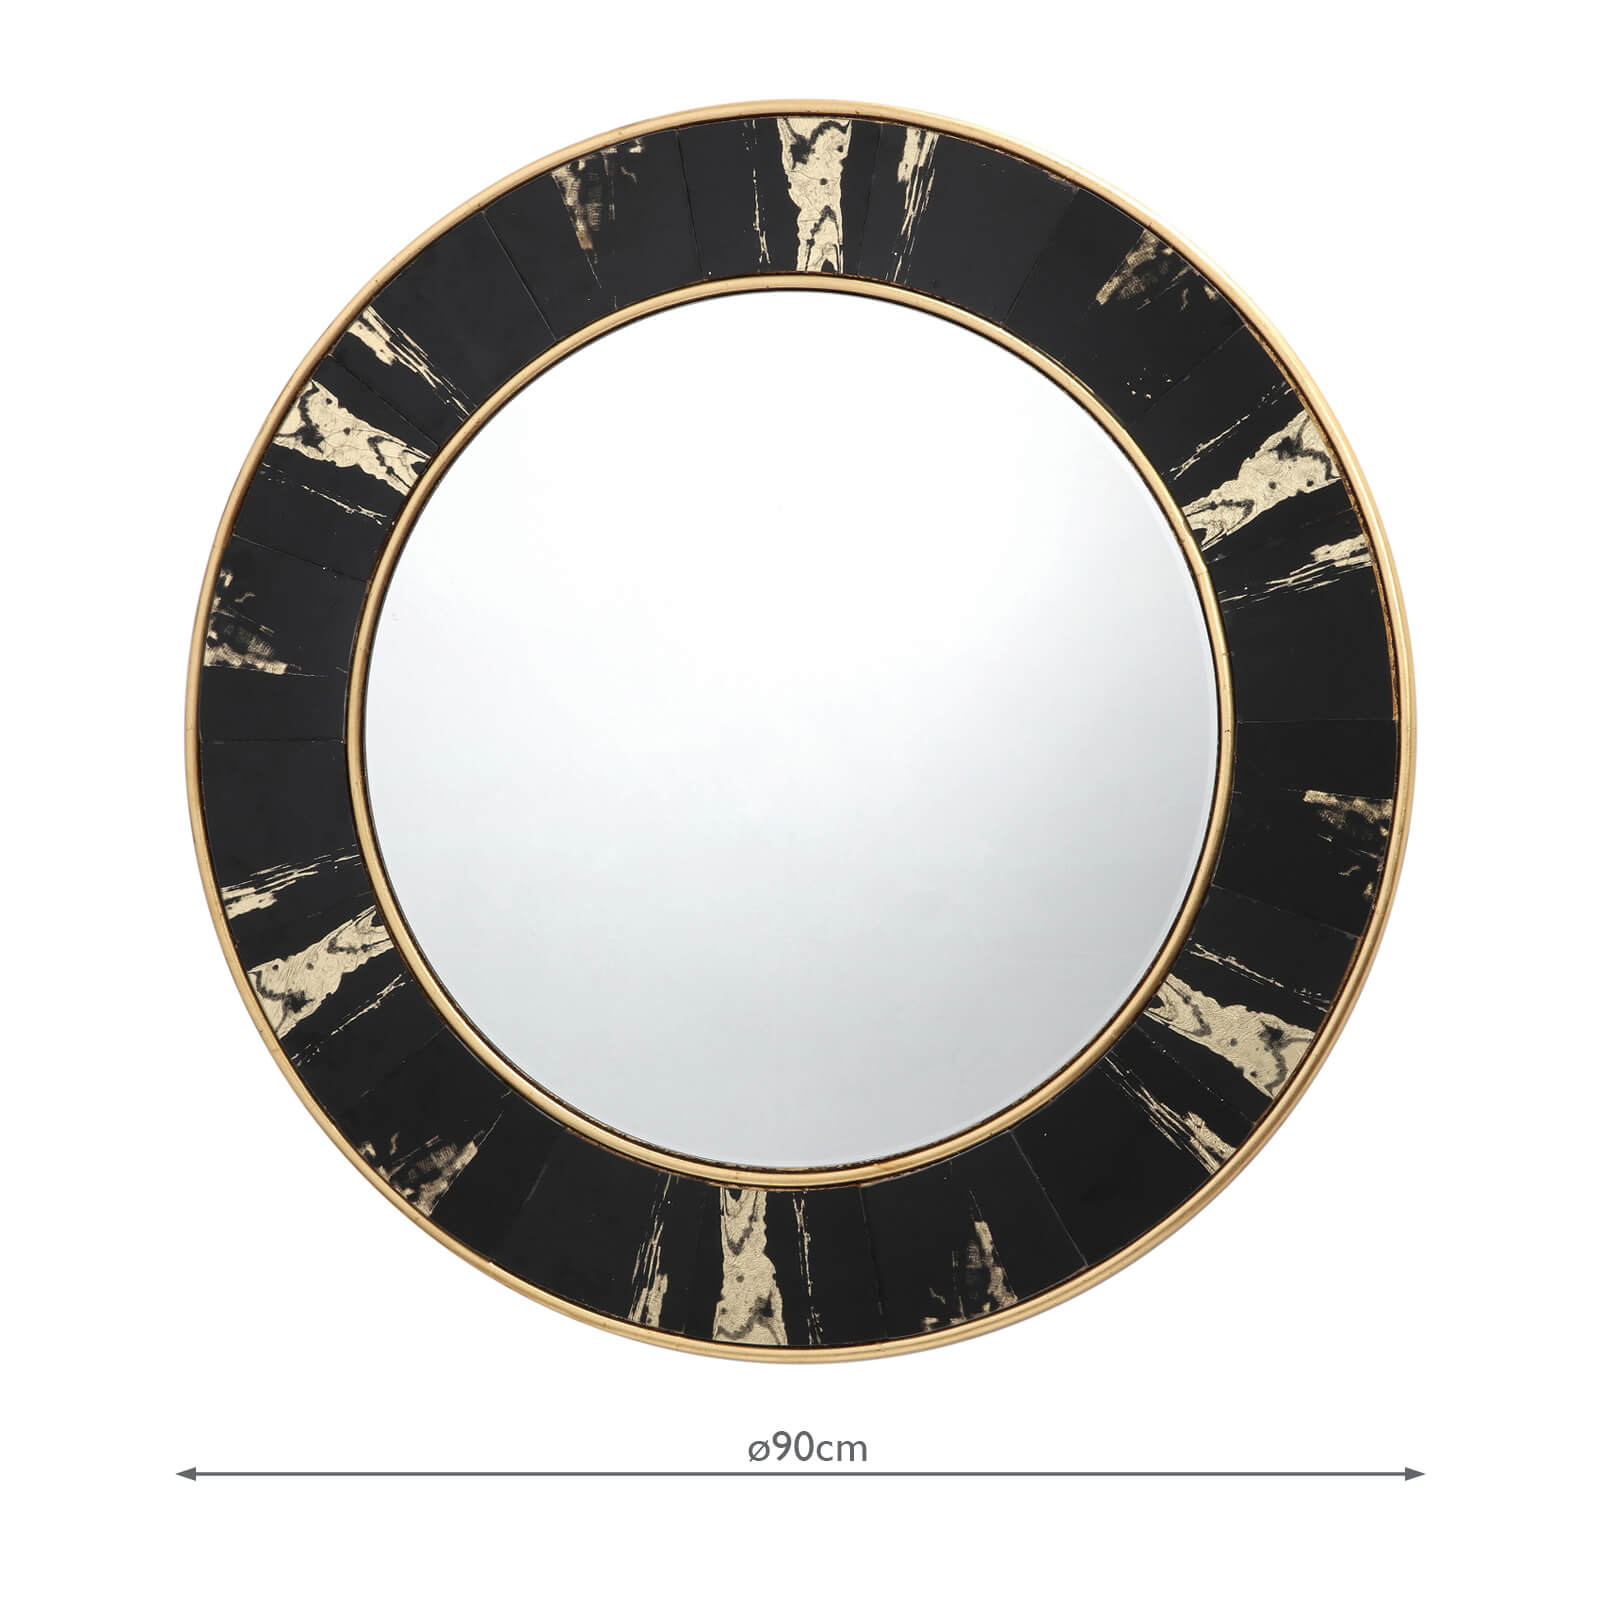 Sidone Round Mirror With Black Gold, Gold Circle Mirror 80cm